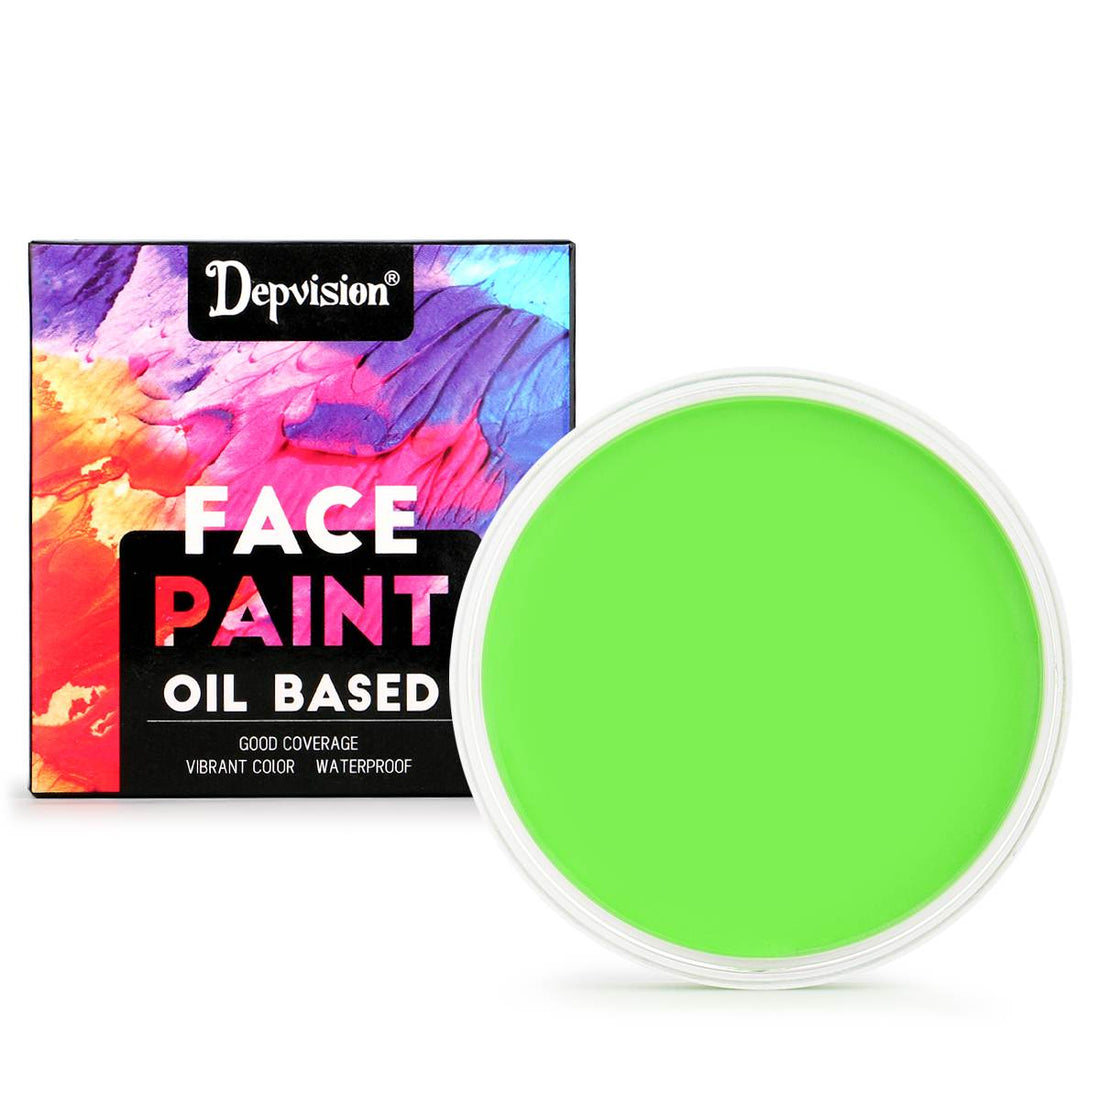 Waterproof Oil Based Face Paint - Bright Green